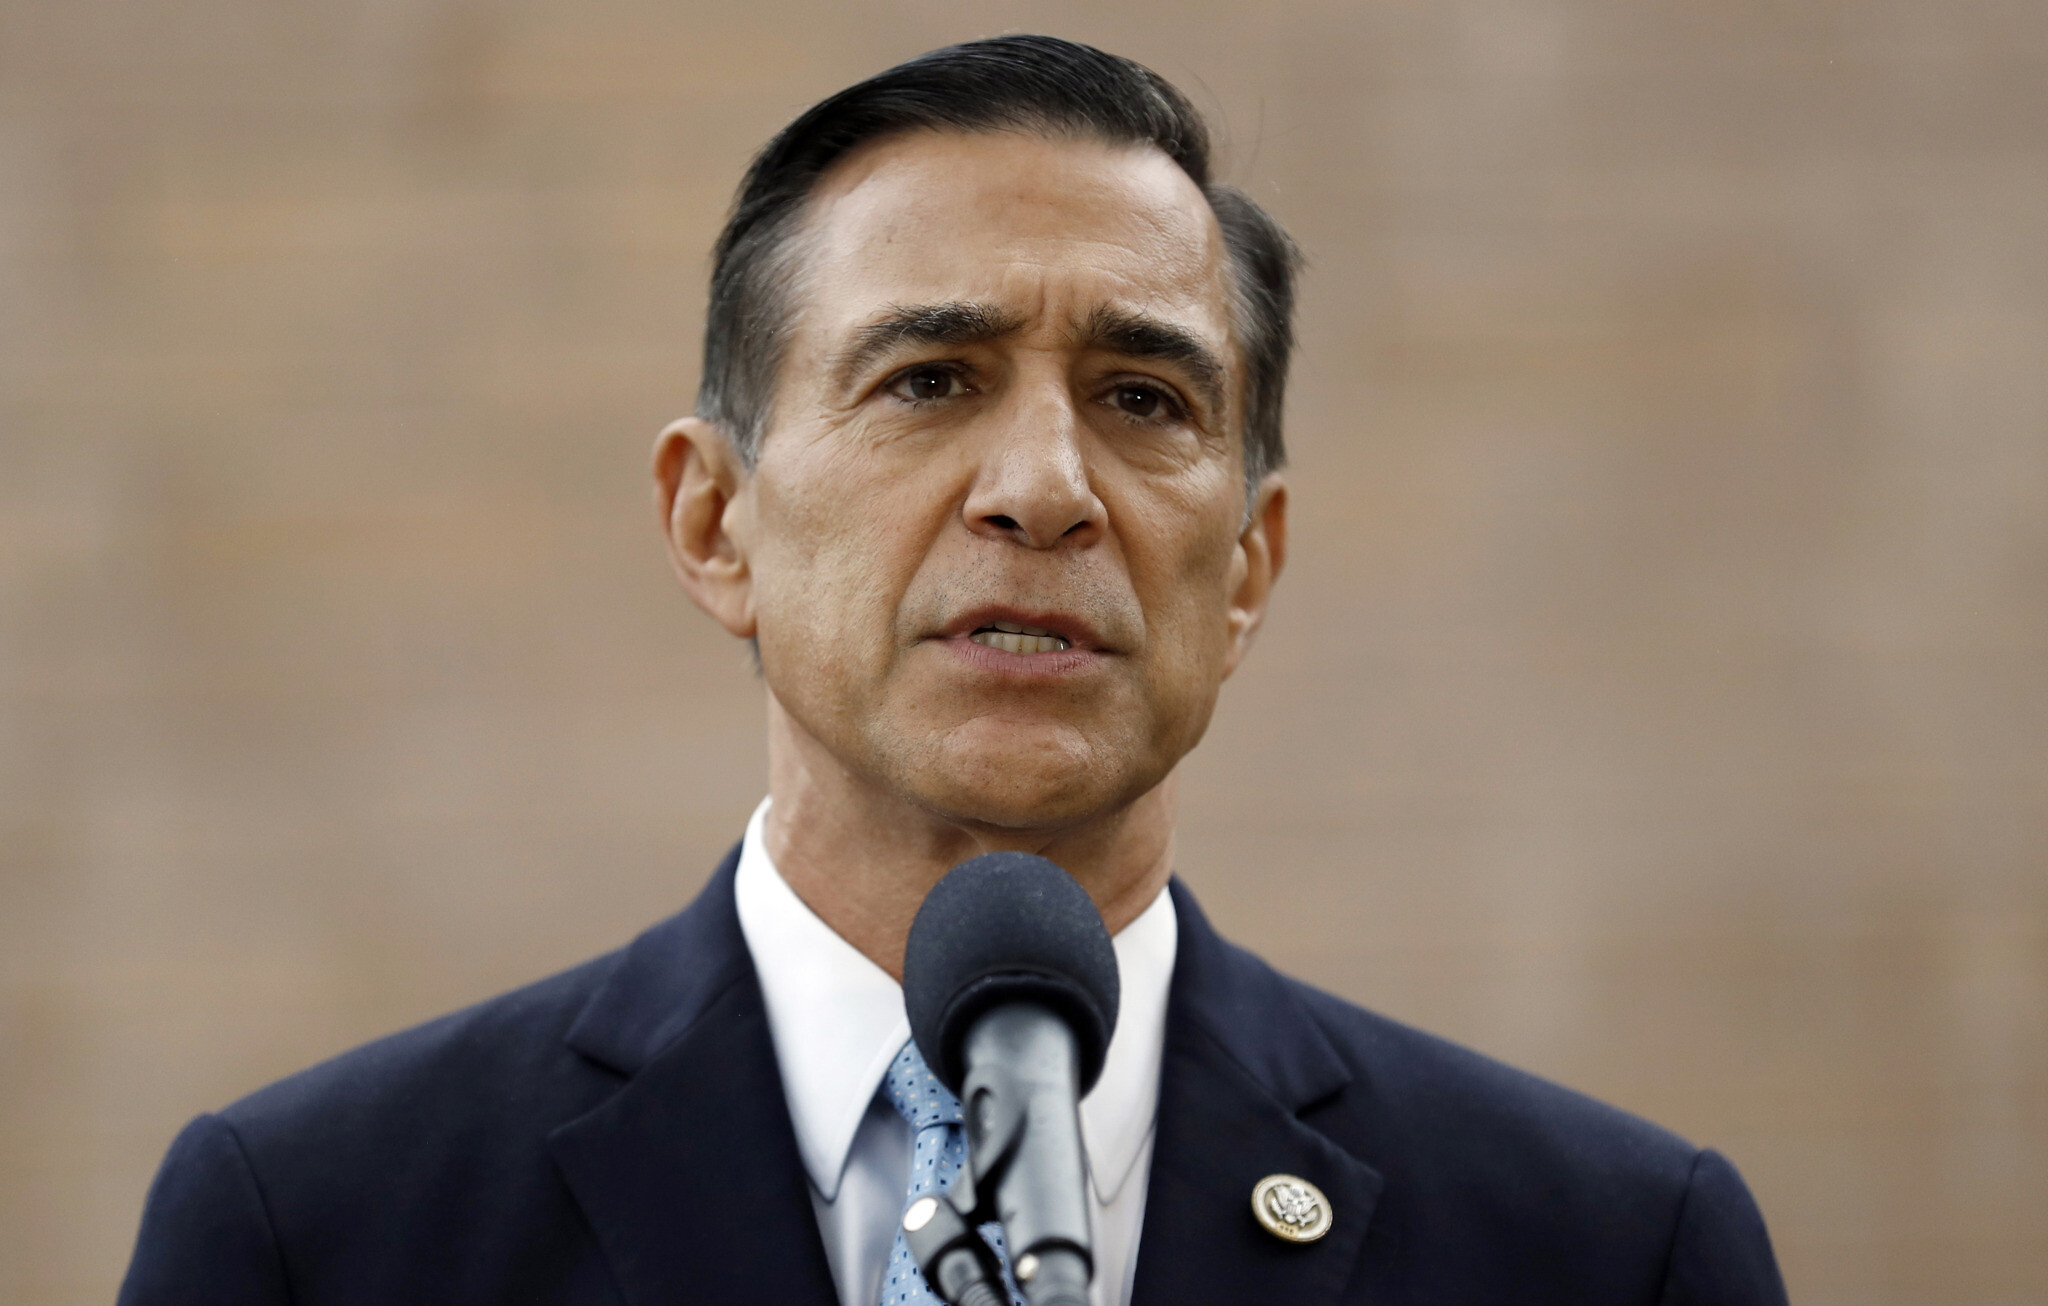 Darrell Issa headed back to Congress after defeating Ammar Campa-Najjar The Times of Israel photo